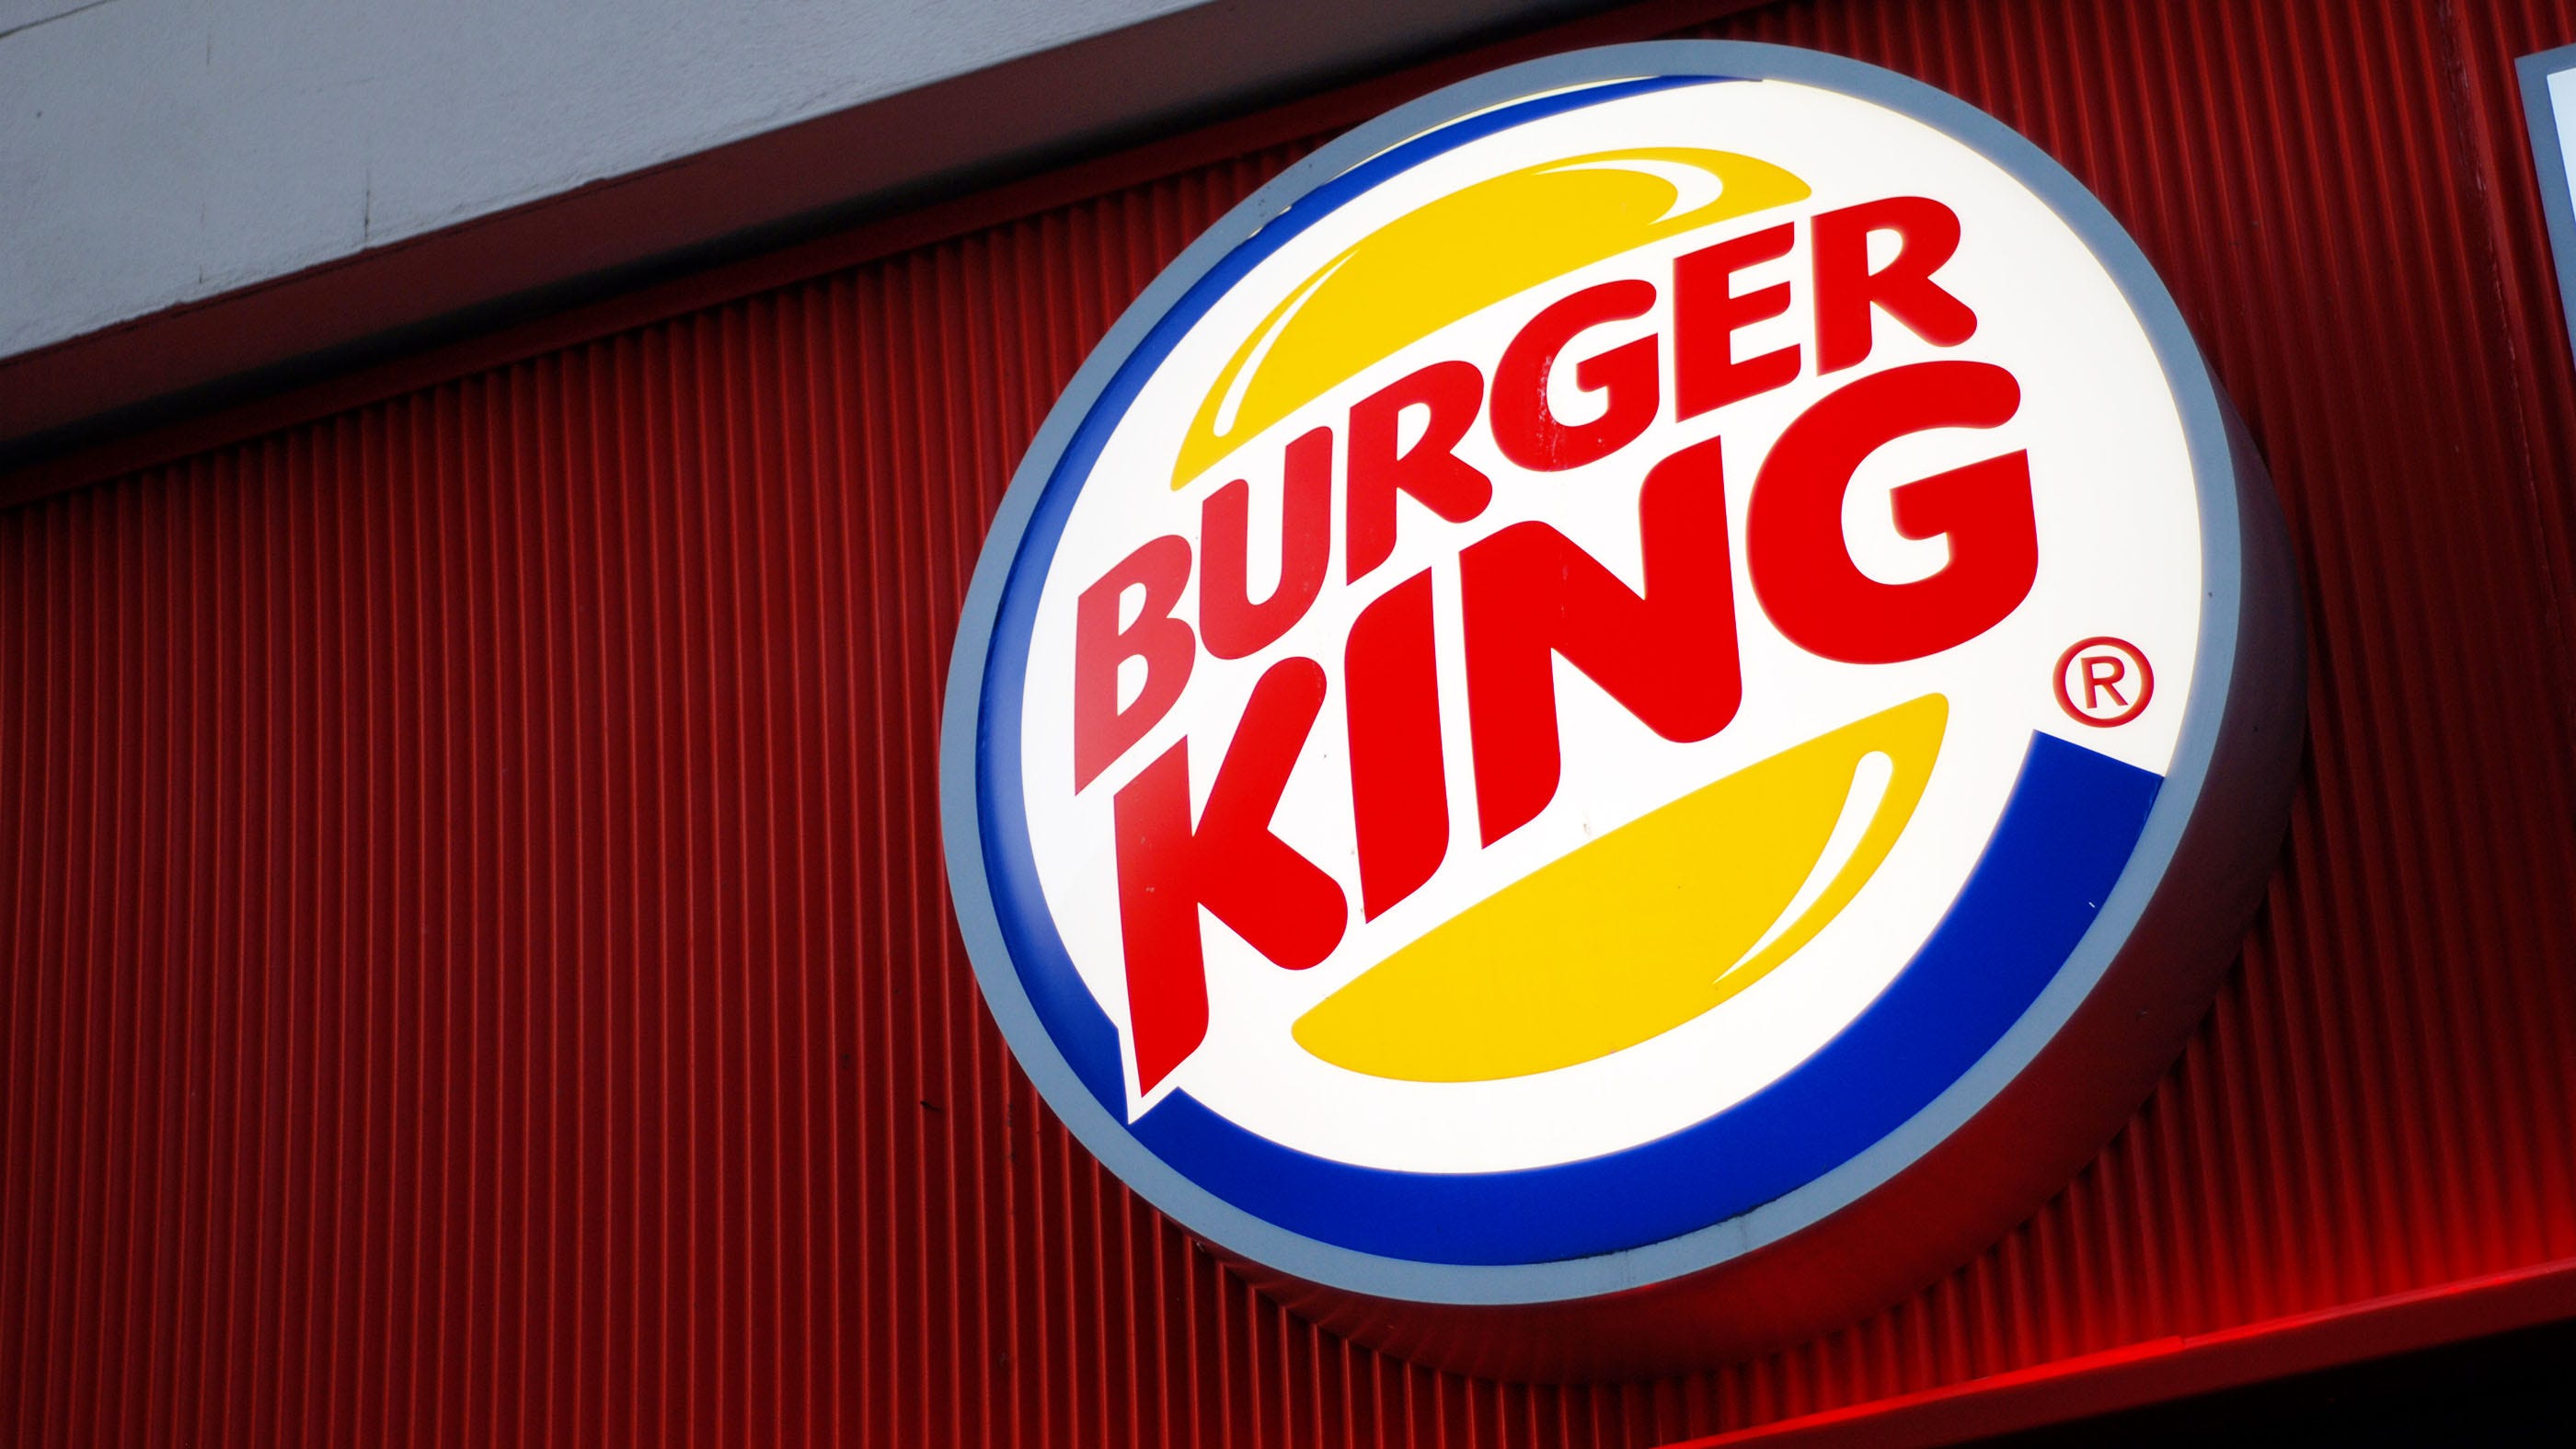 Tennessee Burger King shooting: 2 arrested after spicy chicken sandwich dispute